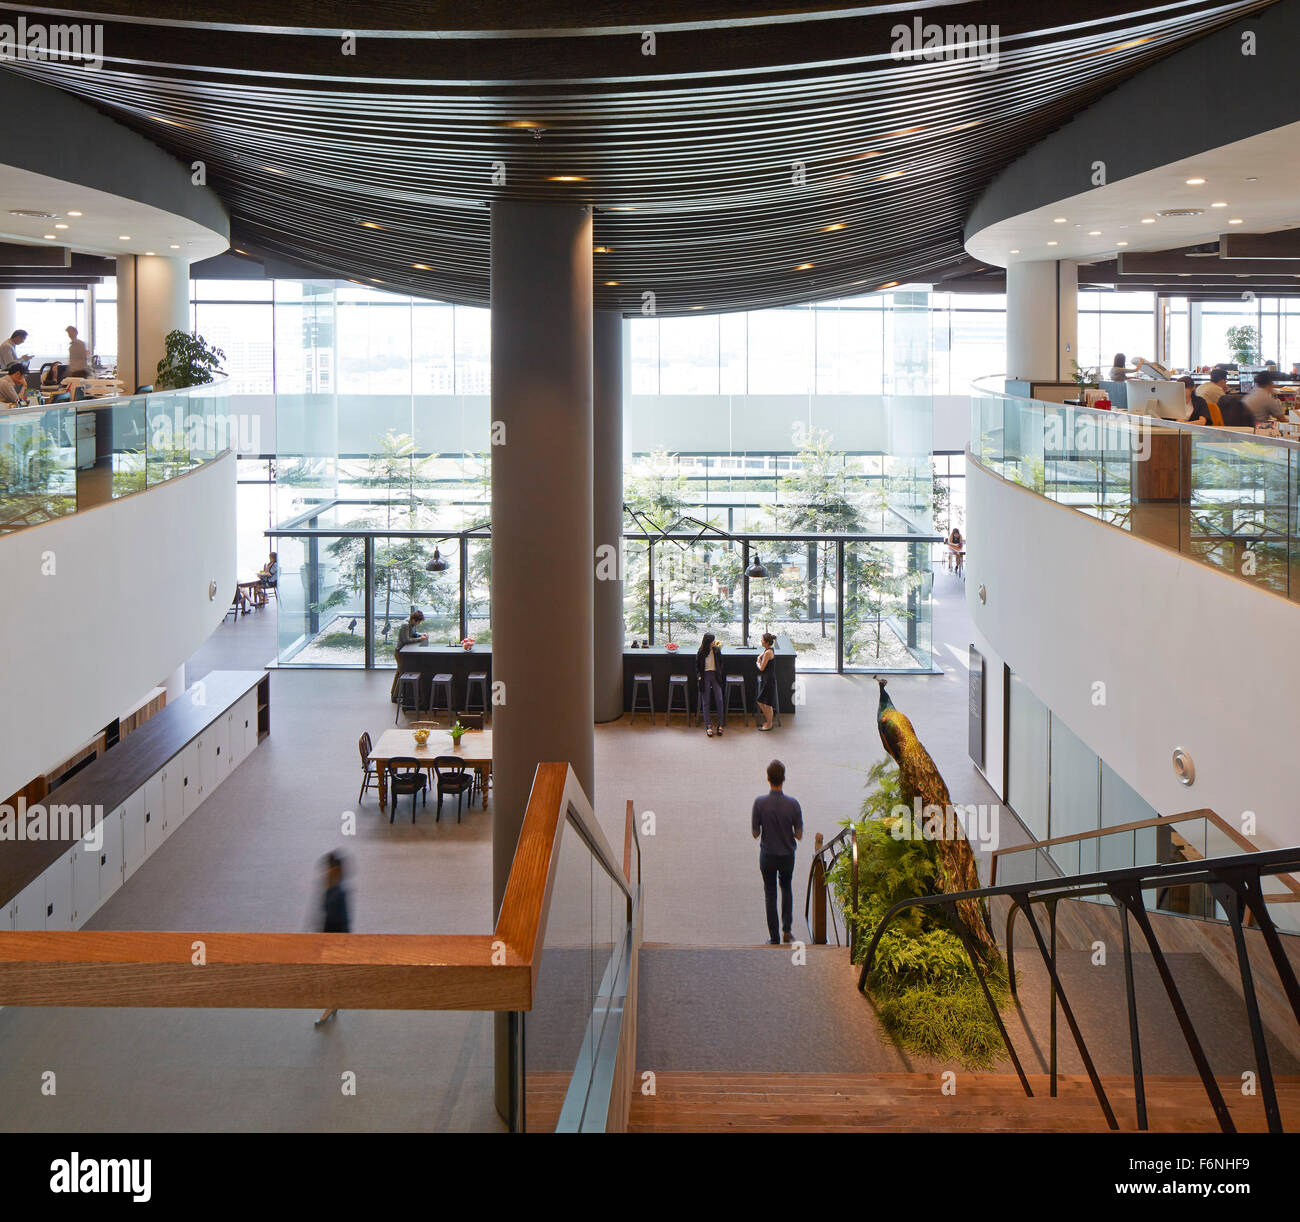 View from upper floor towards entrance hall. BreadTalk IHQ, Singapore, Singapore. Architect: Kay Ngeee Tan Architects, 2014. Stock Photo